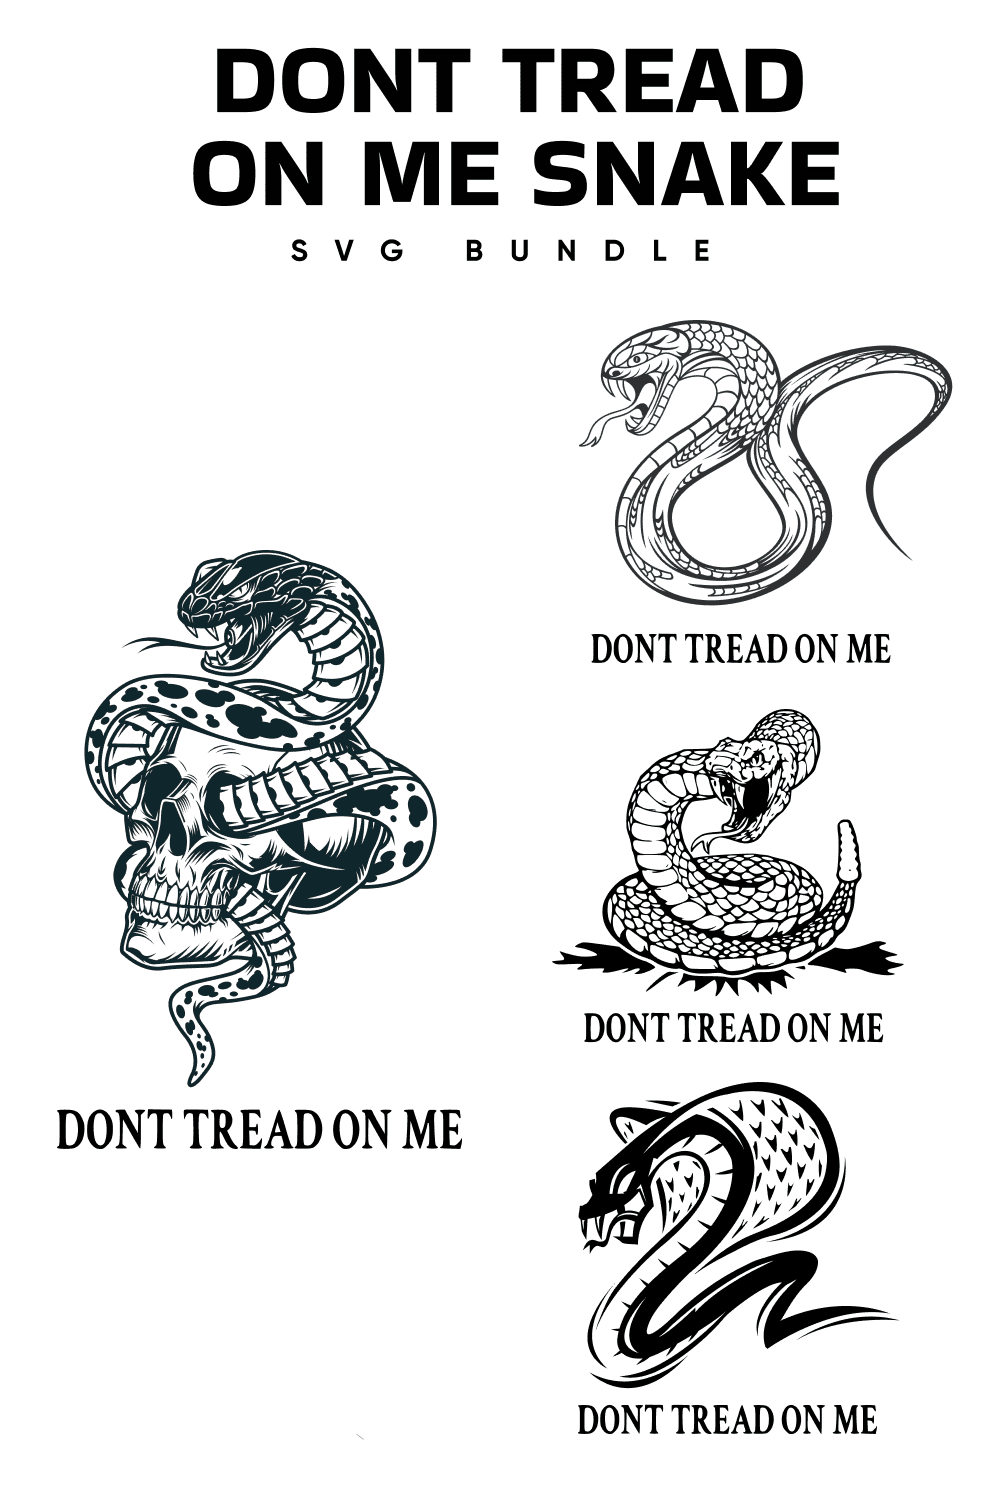 The don't tread on me snake stickers.